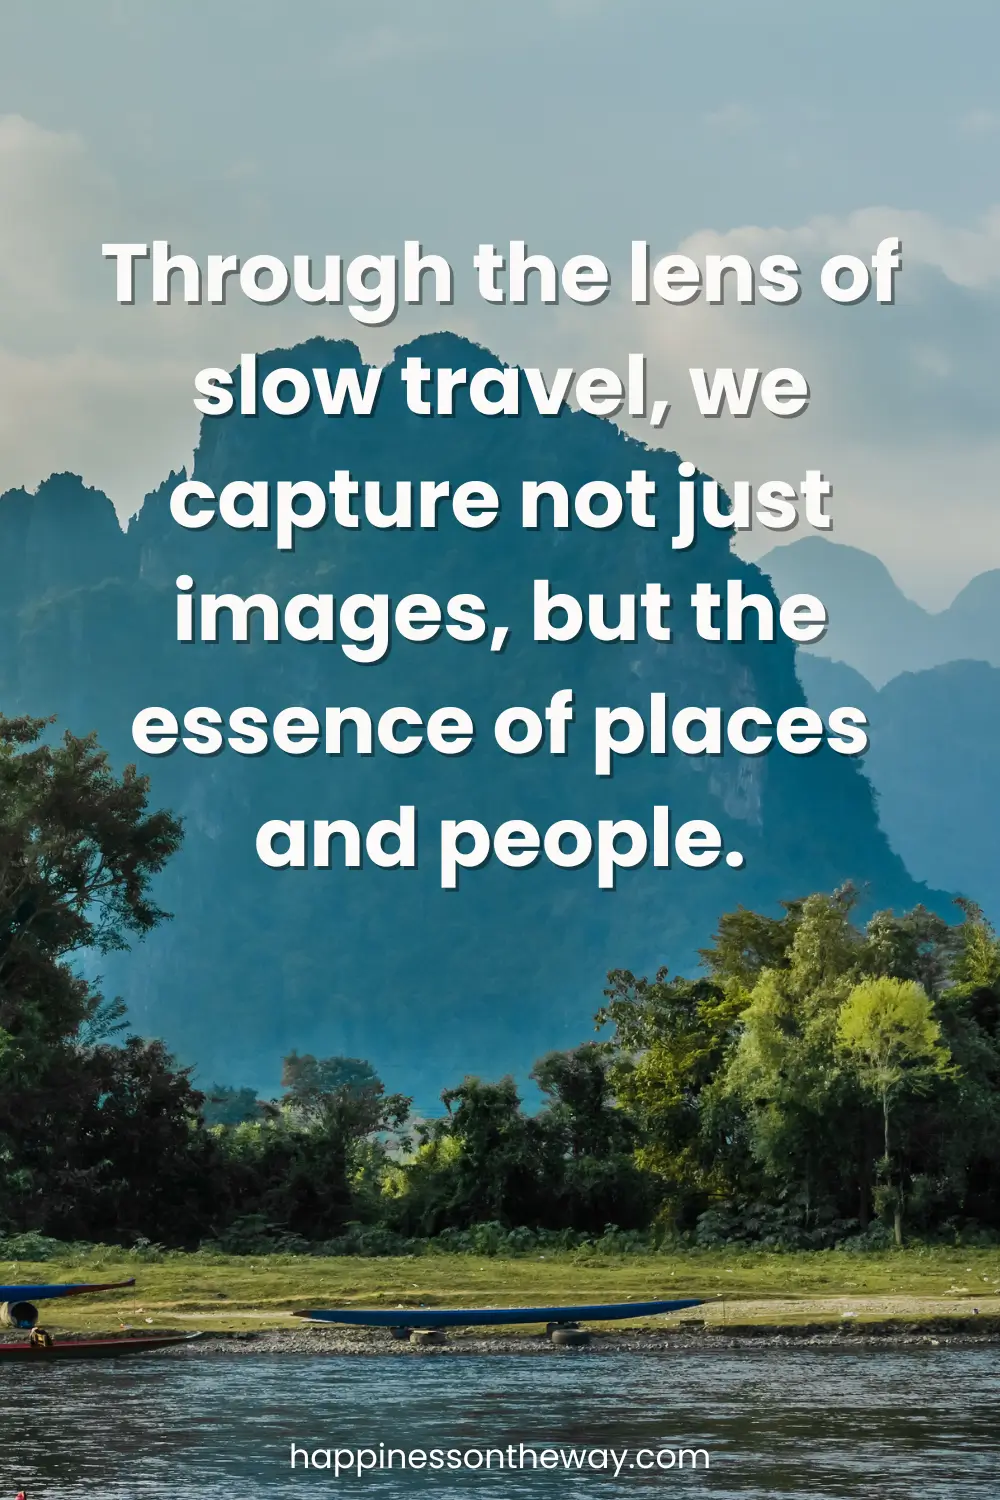 Lush green landscape with distant mountains and a river in the foreground, accompanied by the quote 'Through the lens of slow travel, we capture not just images, but the essence of places and people.'